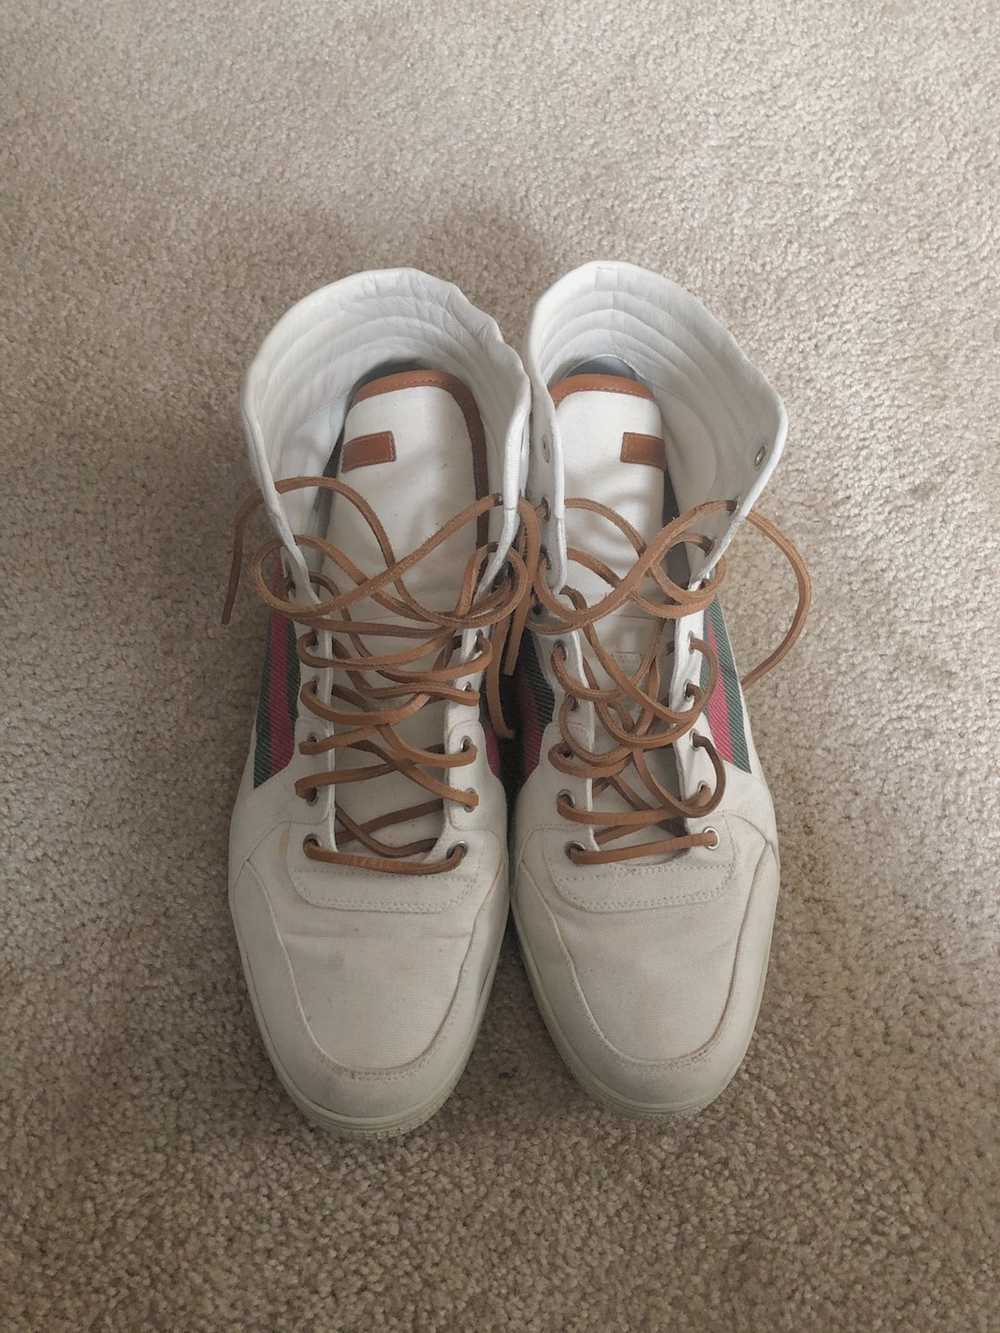 Gucci Gucci High Top Canvas Shoes - image 2